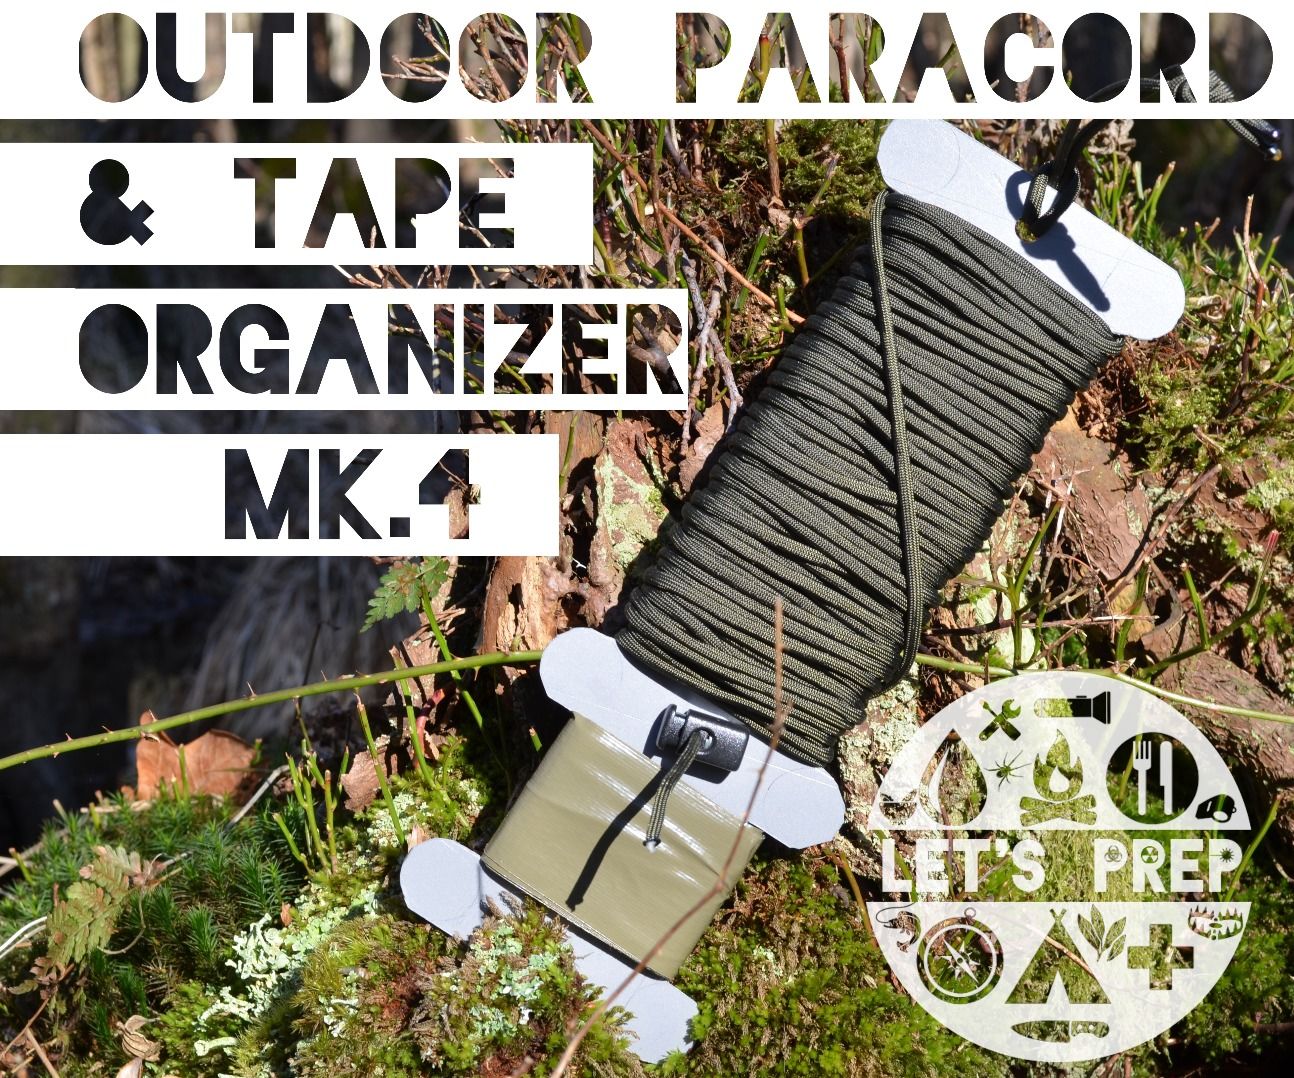 MP#14: Outdoor Paracord & Tape Organizer Mk.IV